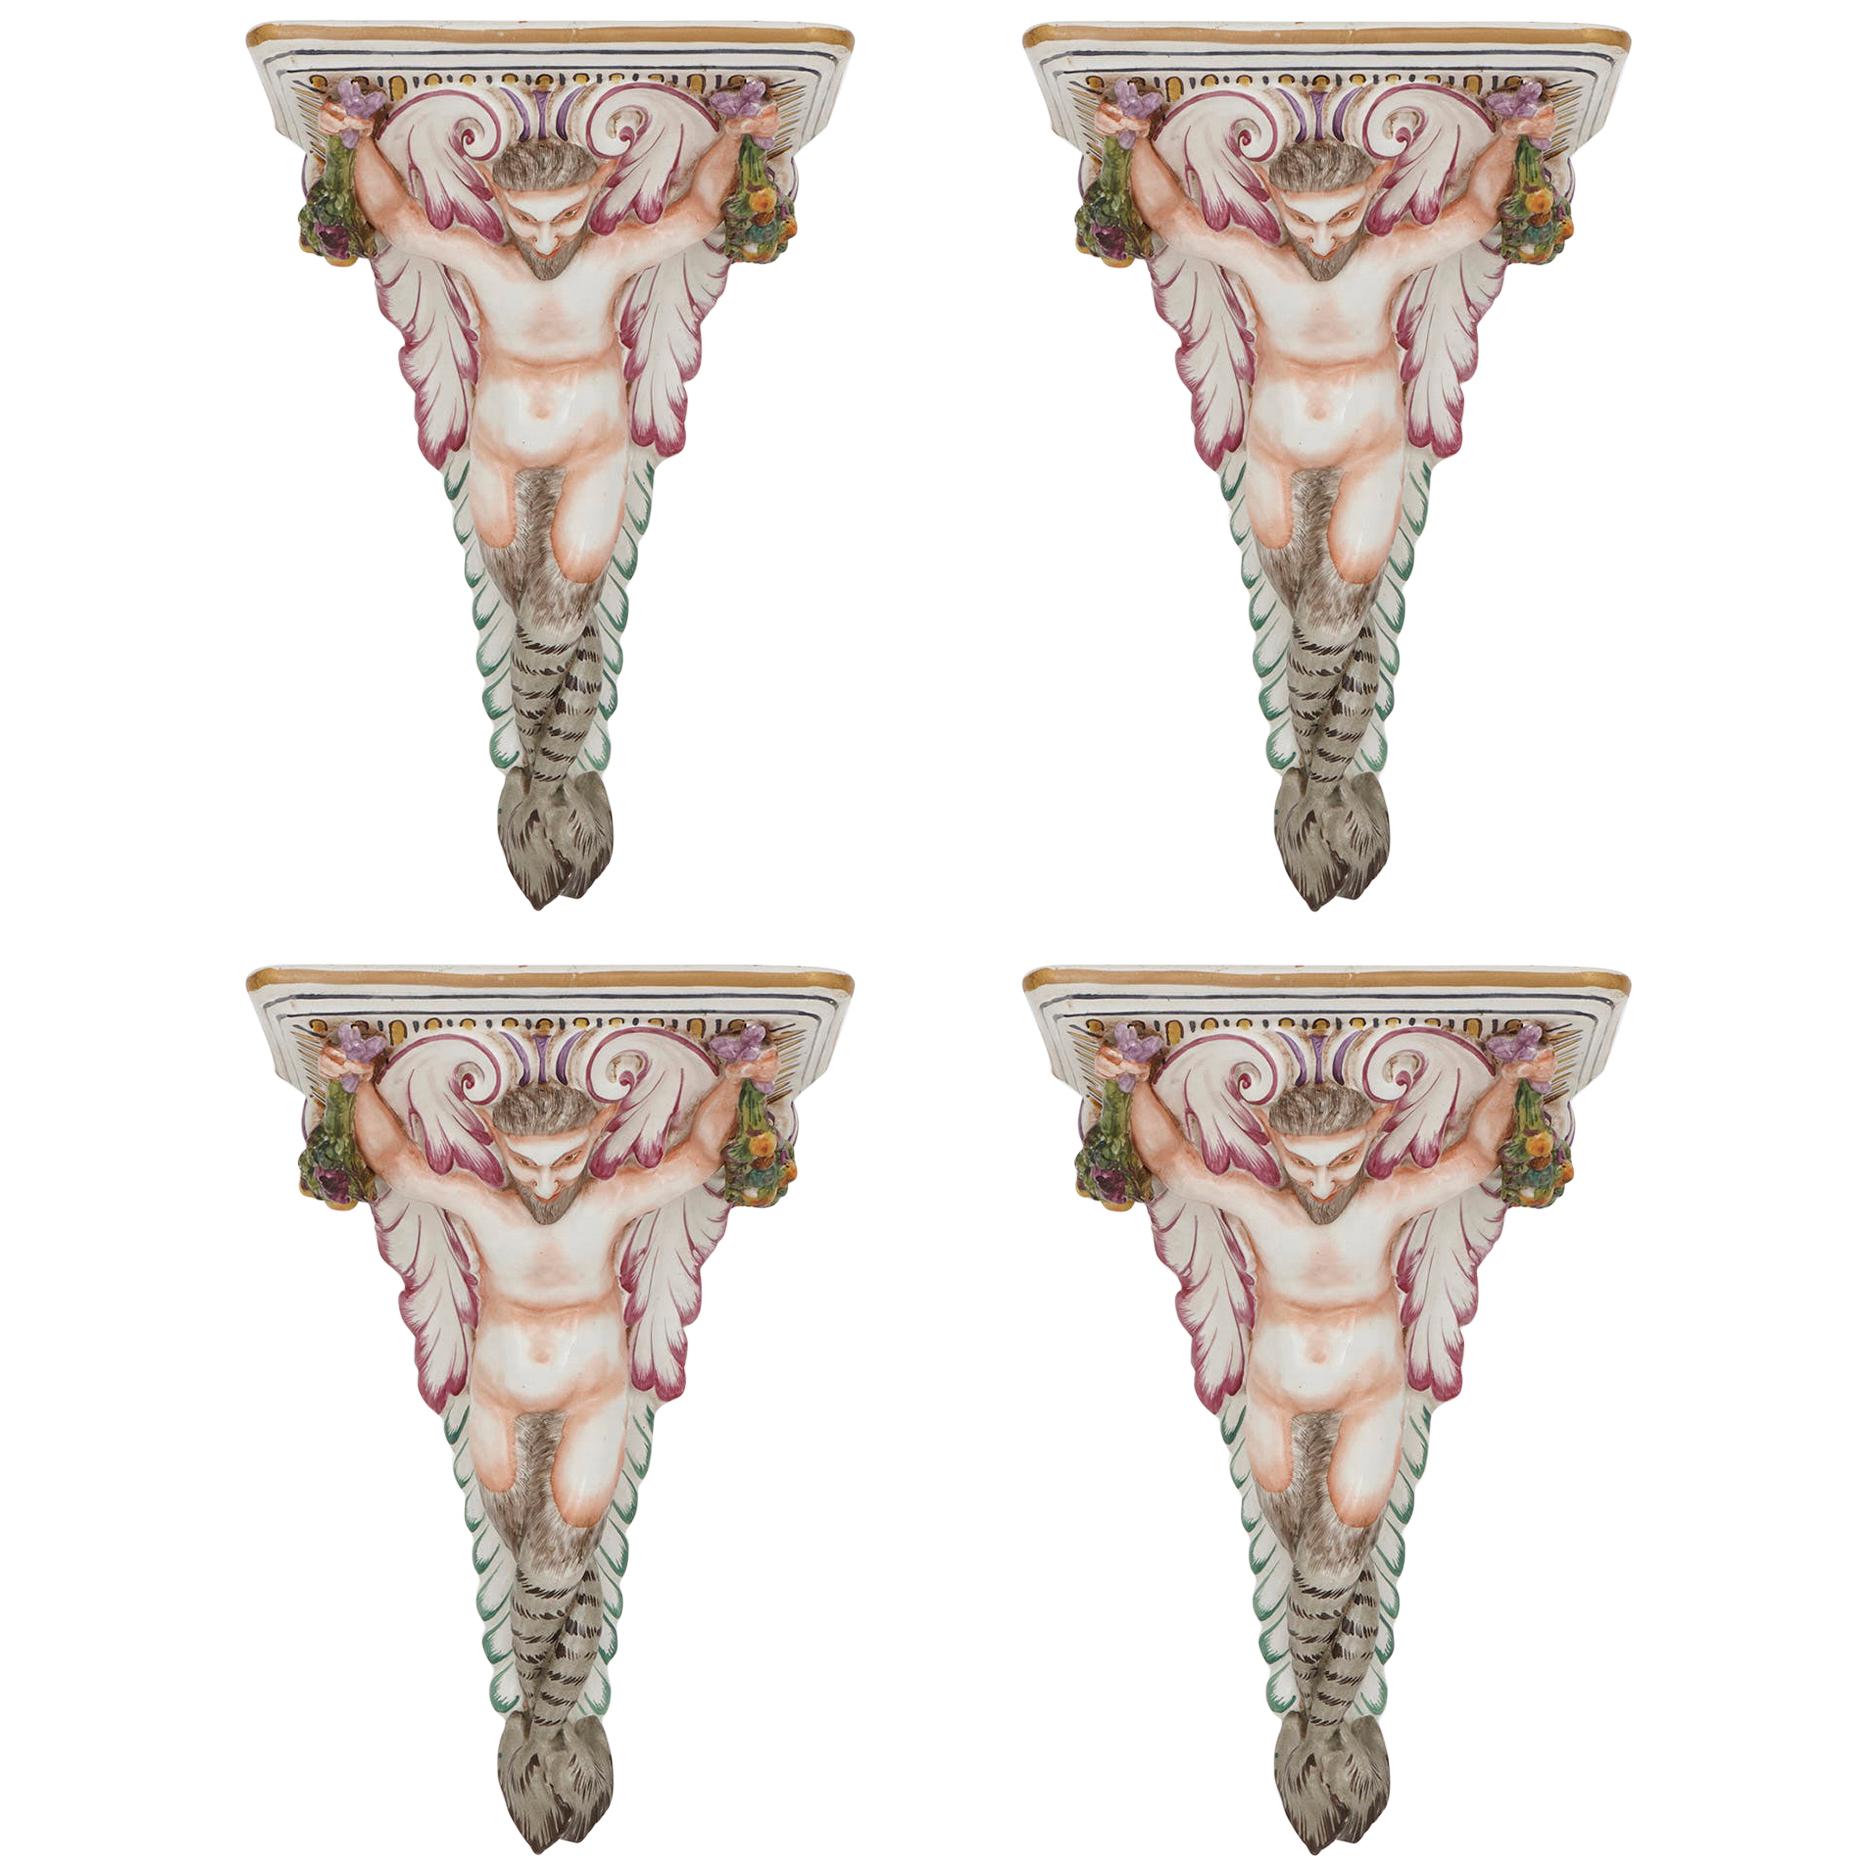 Four Decorative Porcelain Wall Brackets of Satyr Form For Sale